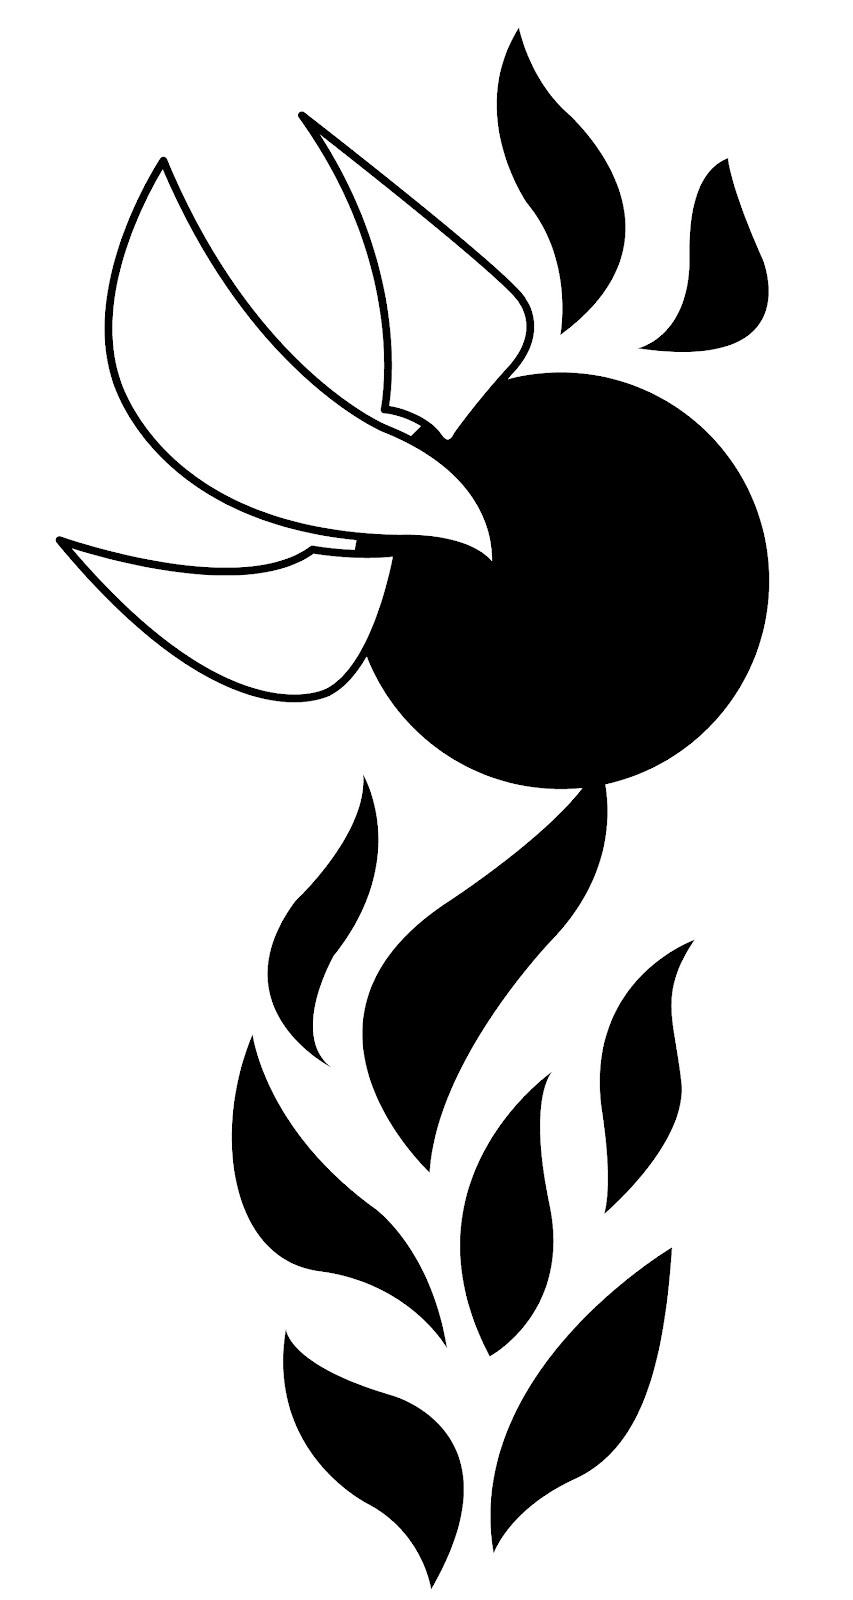 Holy spirit flames clipart